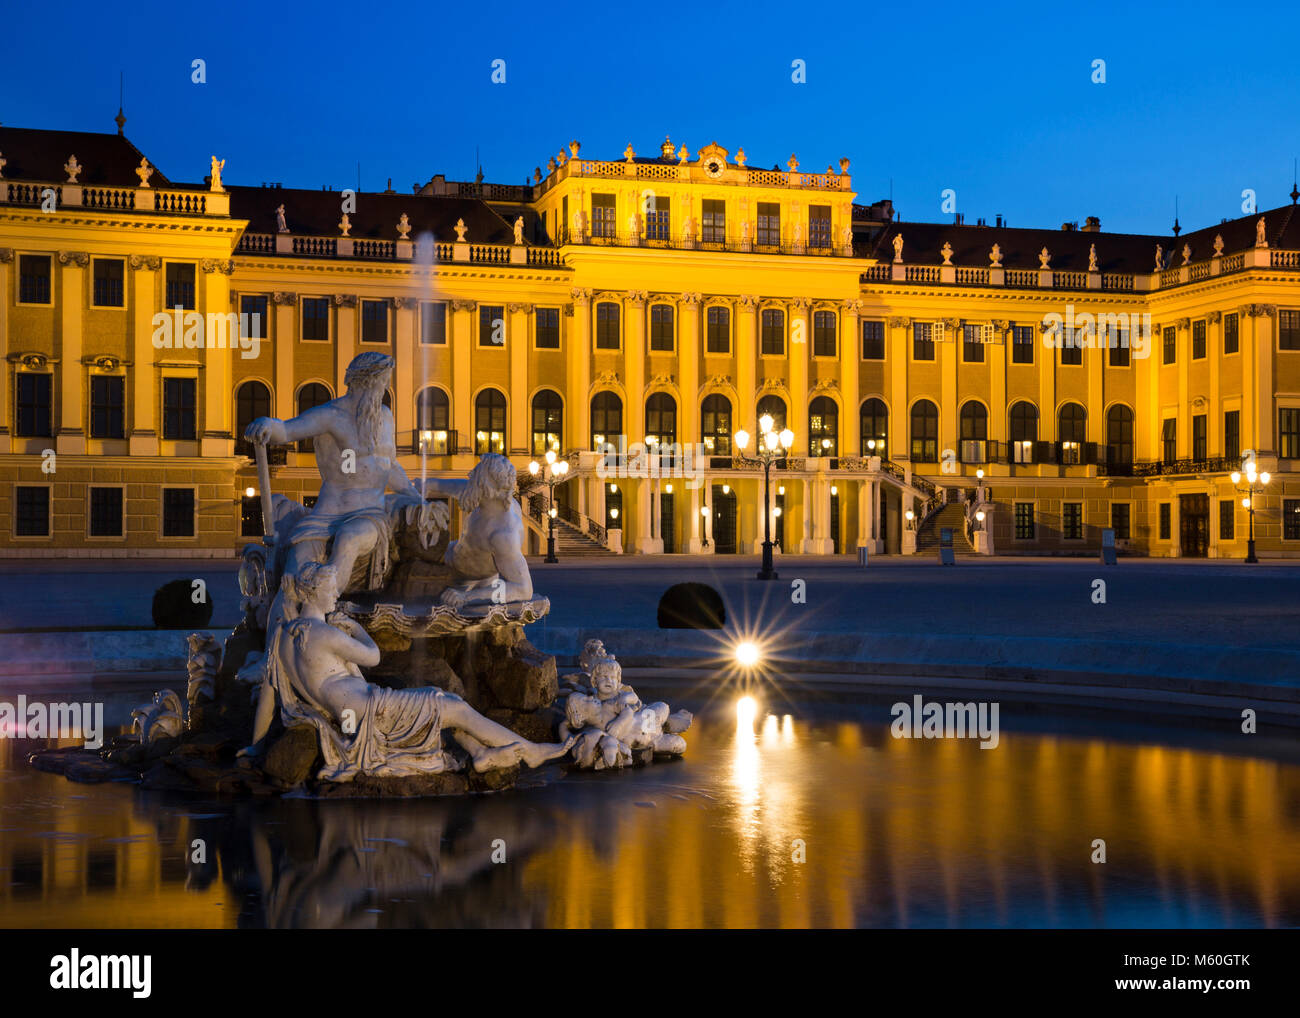 Schönbrunn Palace and one of the Naiad Fountains (spirits of springs and rivers) illuminated at night, Schonbrunn, Vienna, Austria. Stock Photo